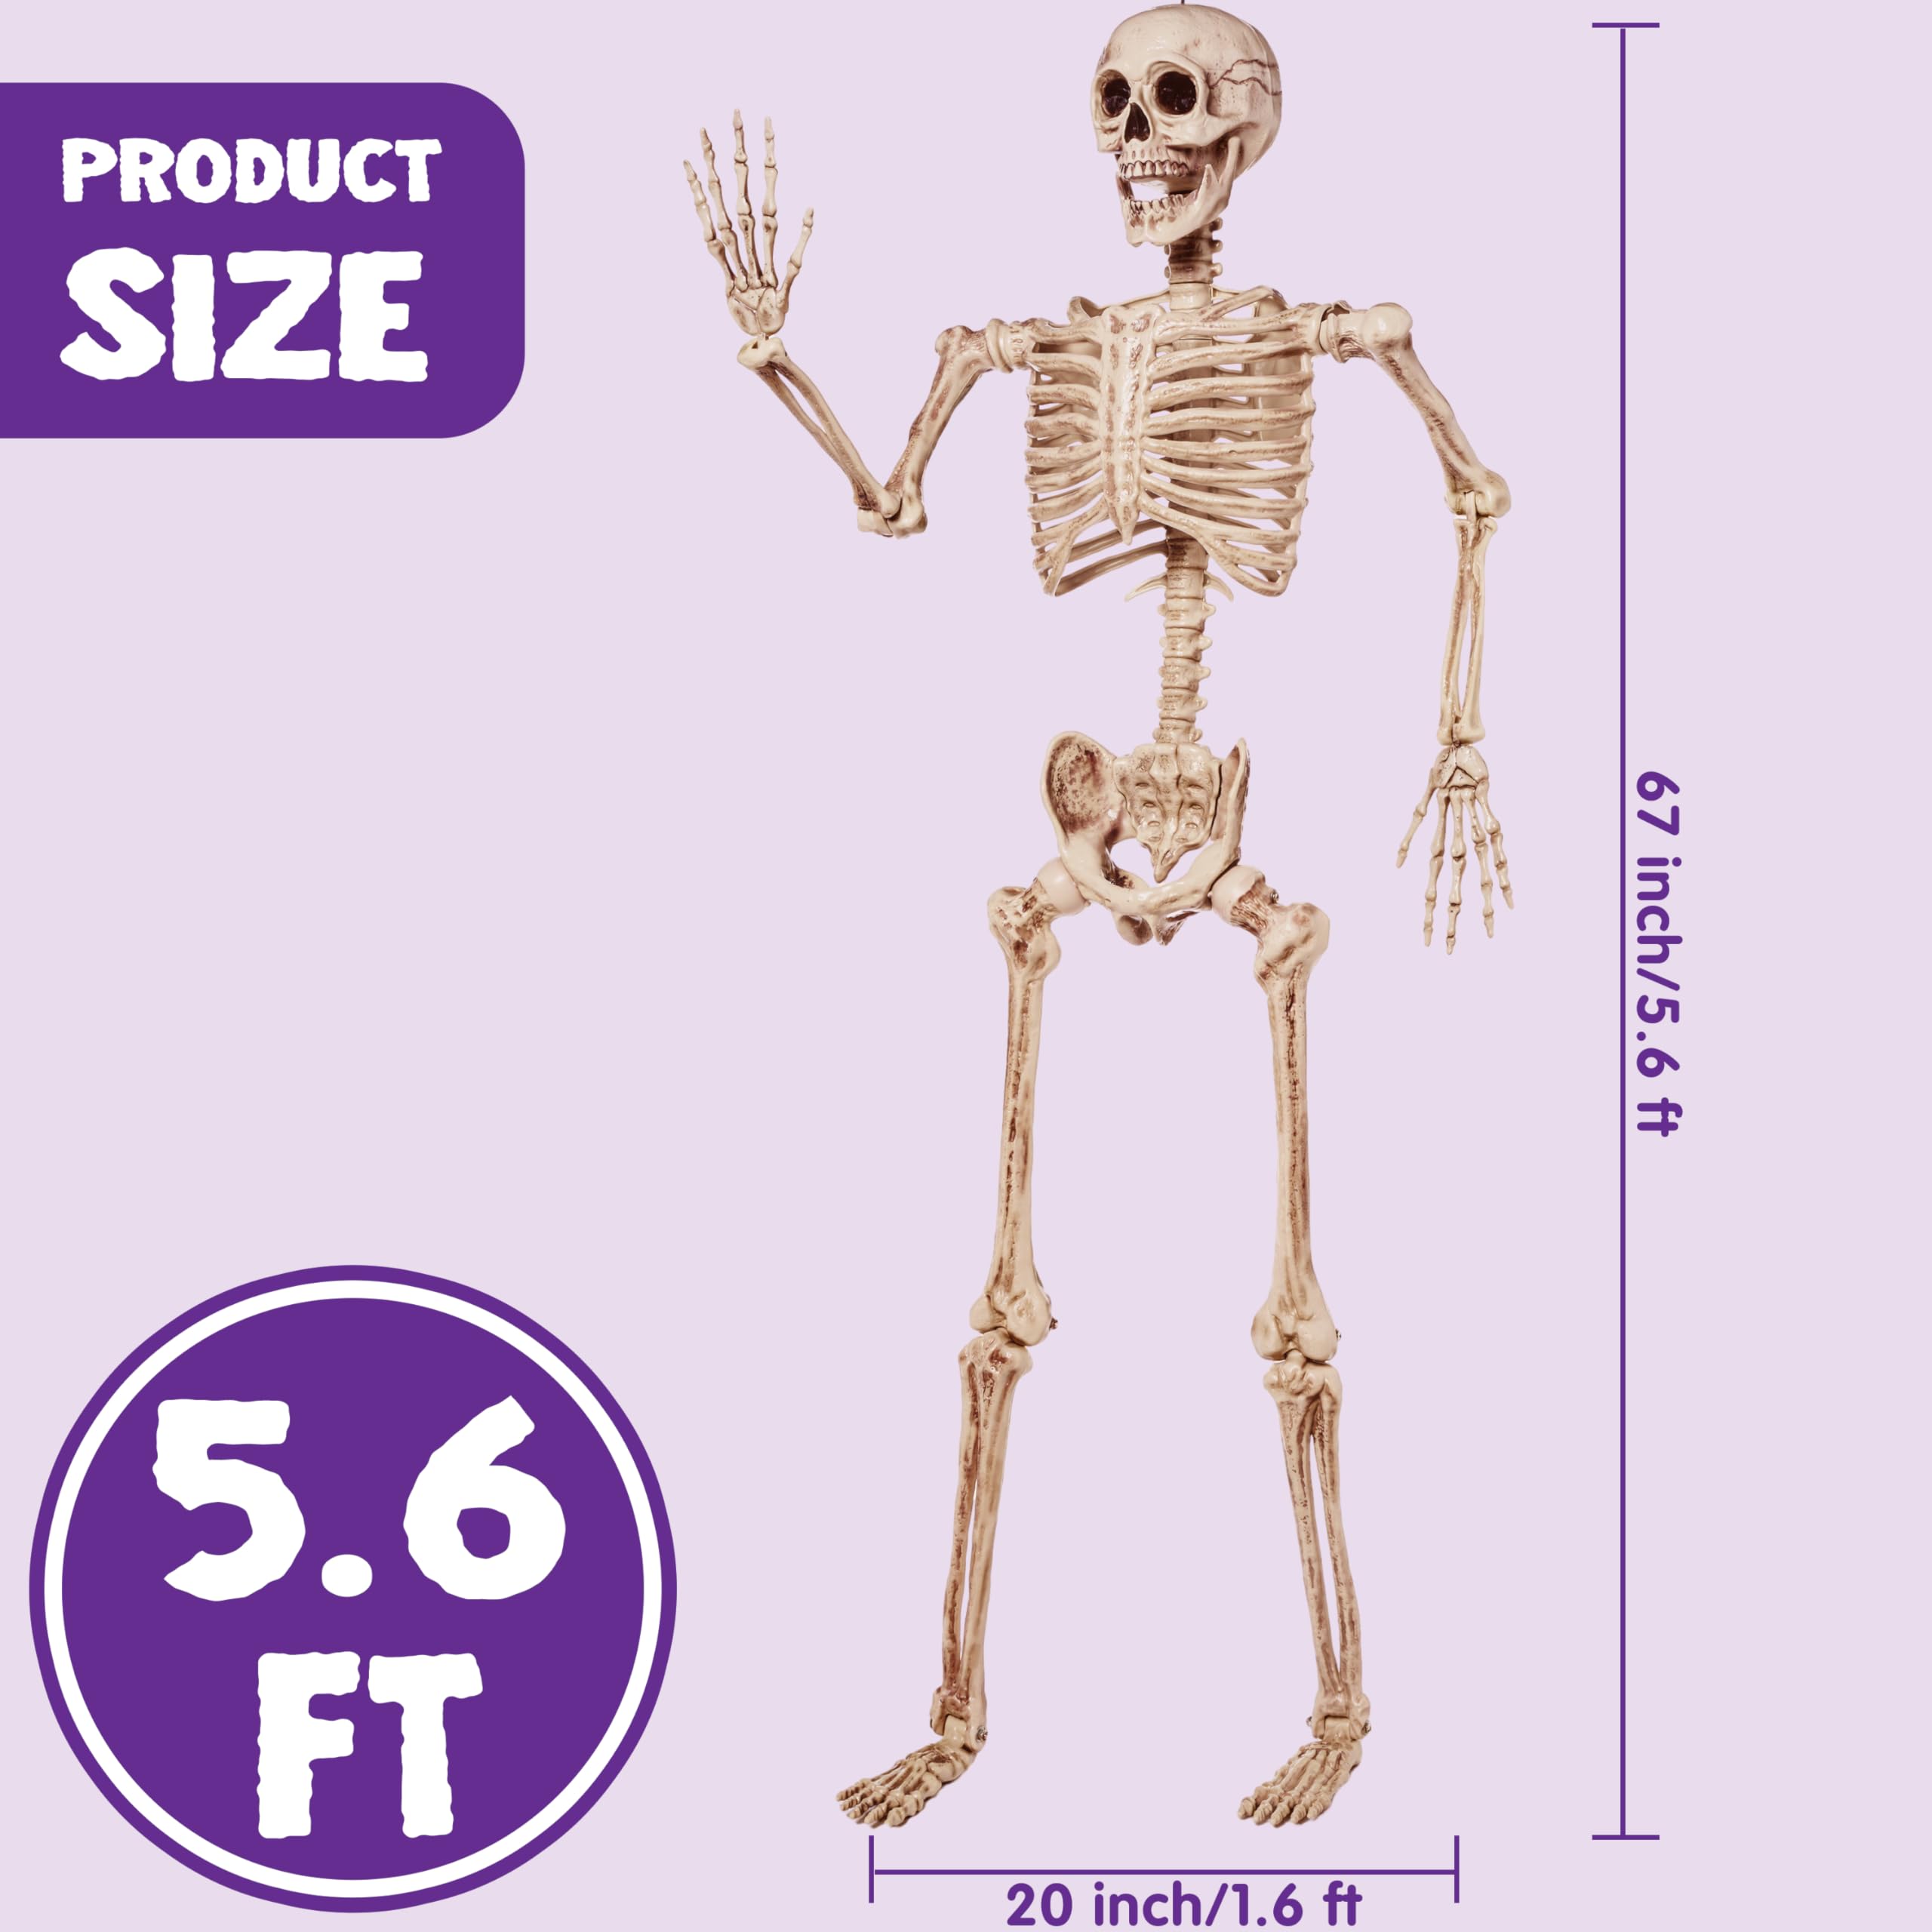 JOYIN 67 Inches Life Size Skeleton Full Body Realistic Human Bones with Posable Joints for Halloween Pose Skeleton Prop Decoration, Indoor and Outdoor Use